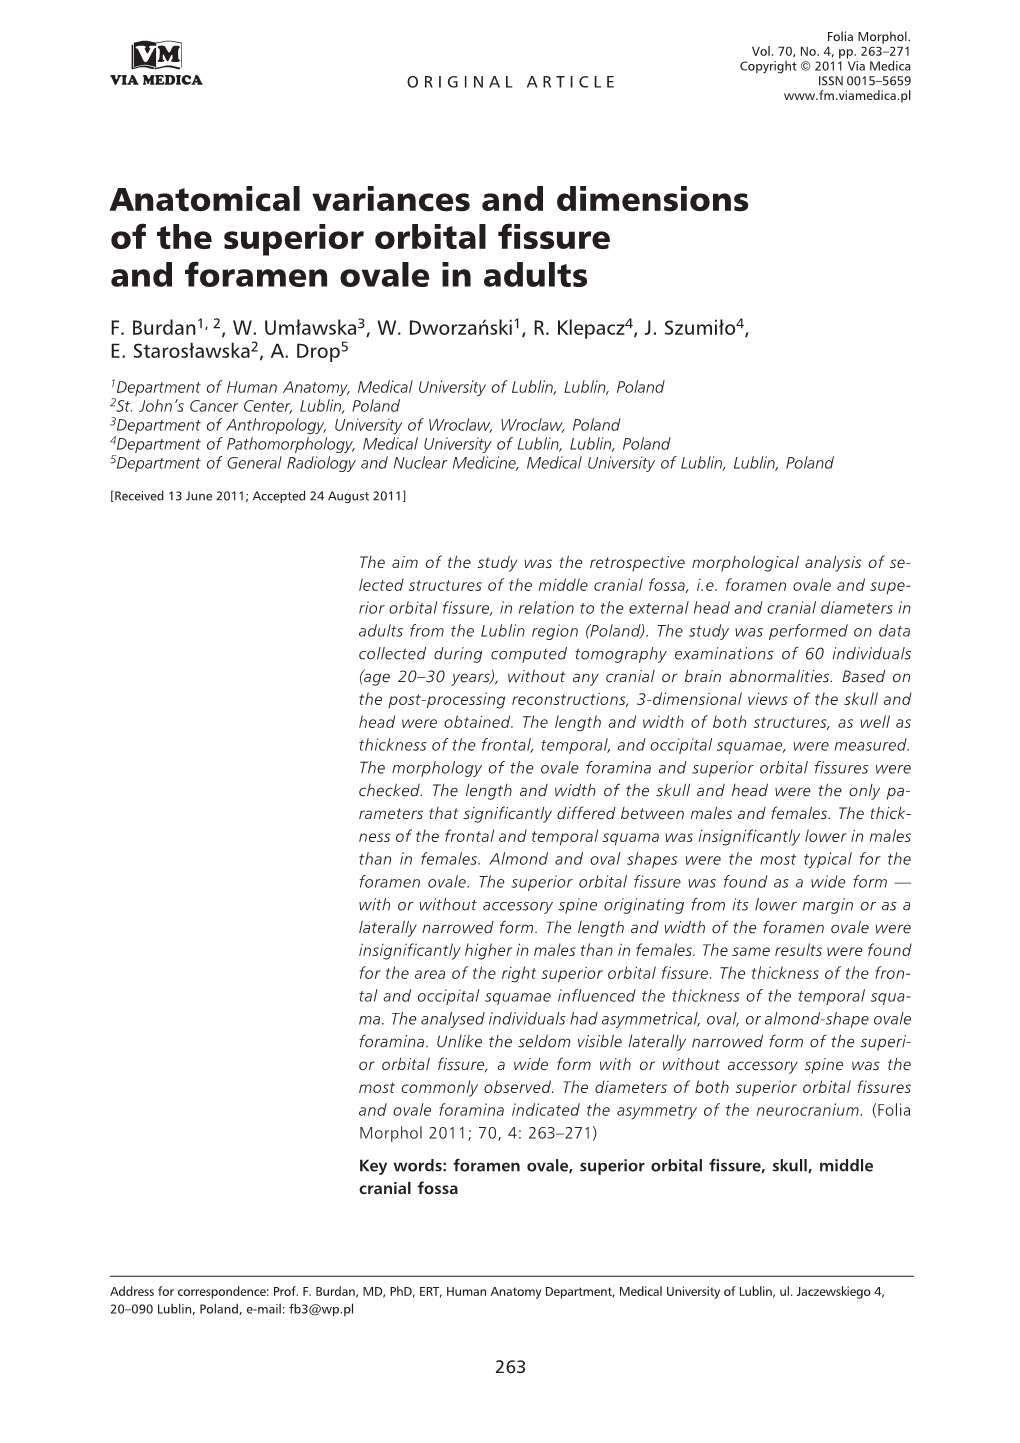 Anatomical Variances and Dimensions of the Superior Orbital Fissure and Foramen Ovale in Adults